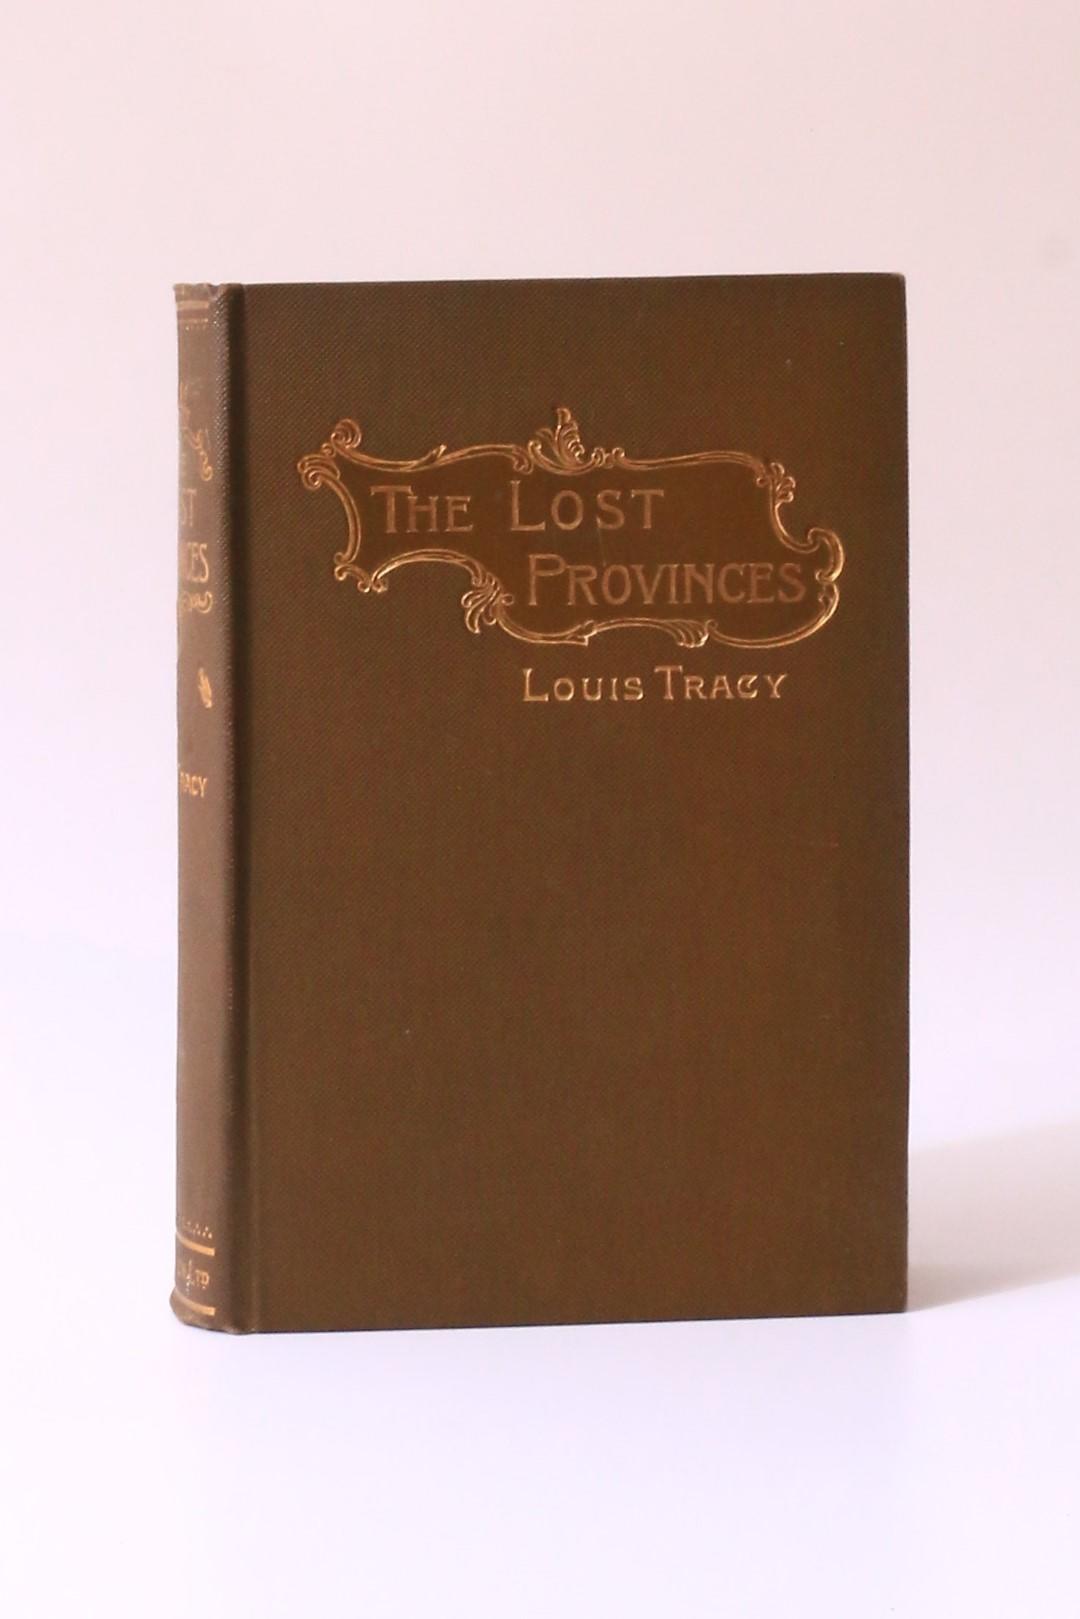 Louis Tracy - The Lost Provinces - Pearson, 1898, First Edition.